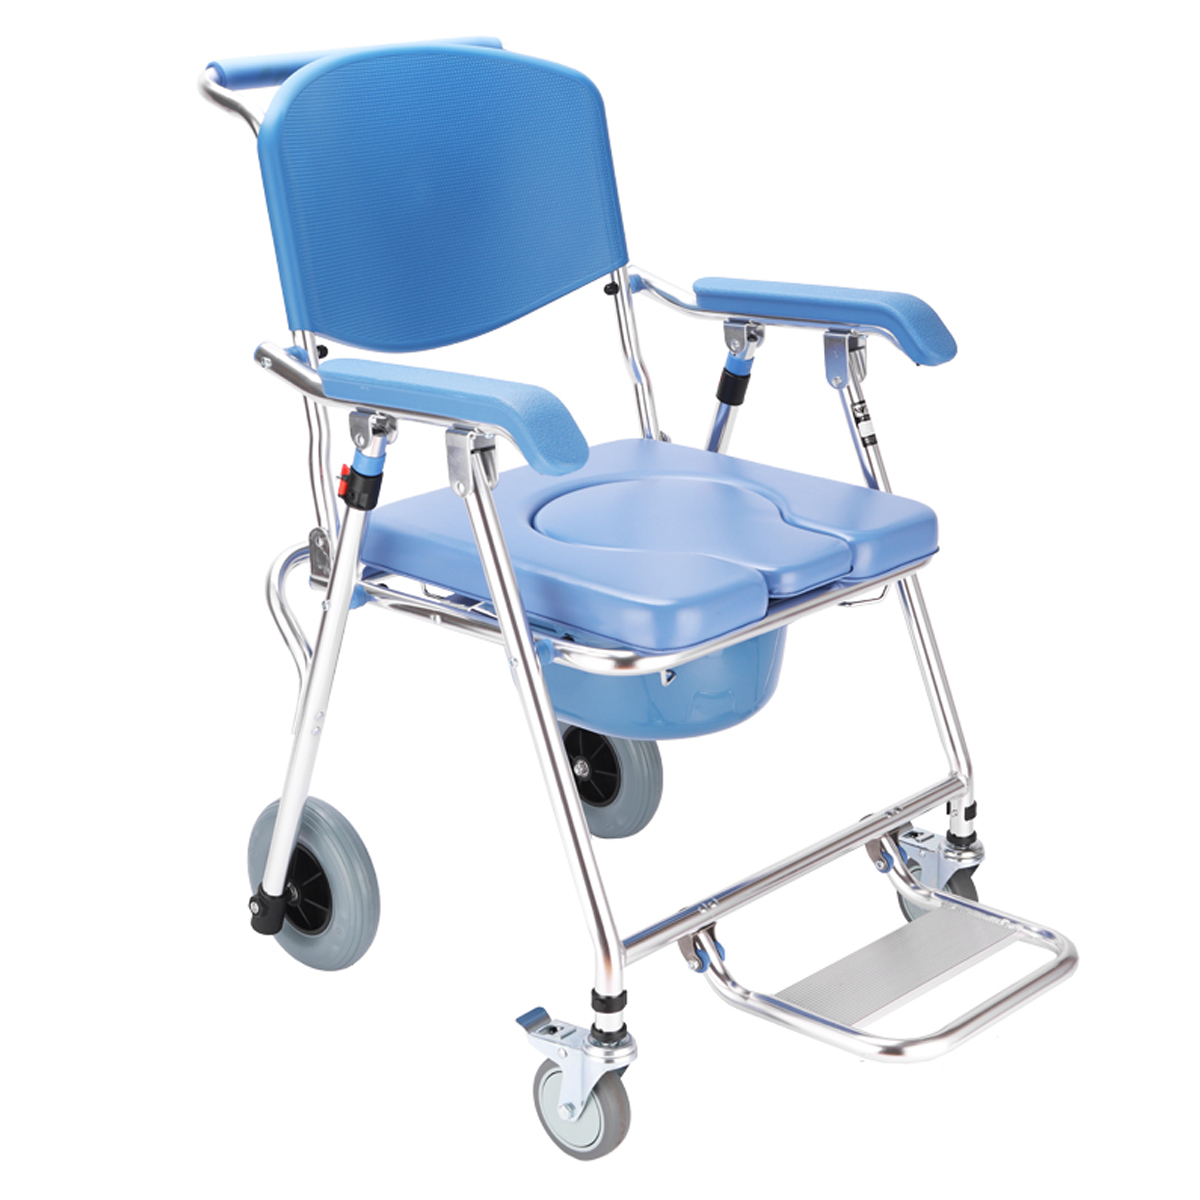 

Portable Folding Commode Shower Toilet Bath Chair Tool Wheelchair Aid Mobile